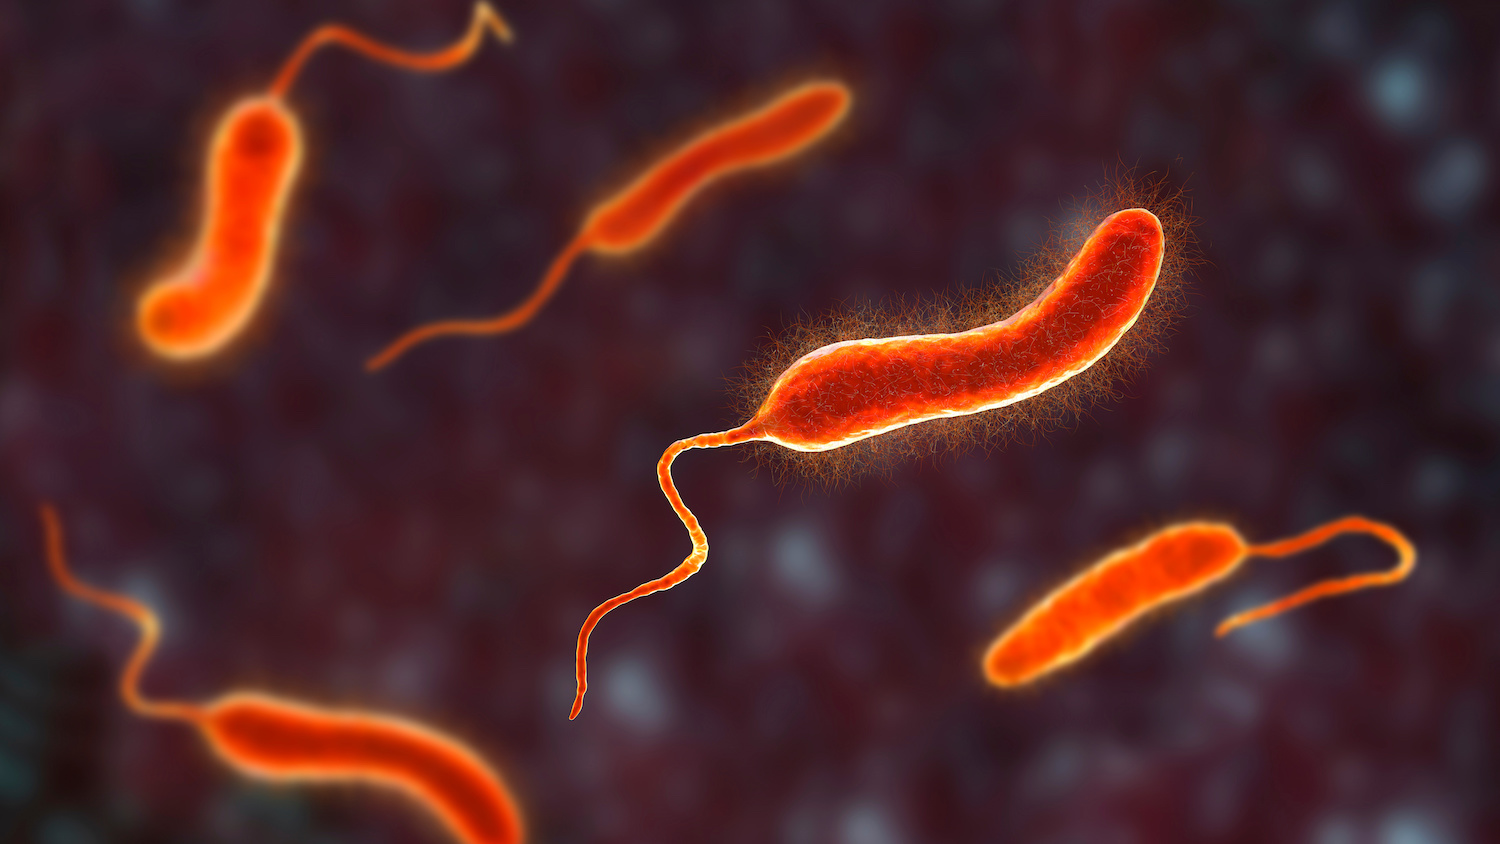 A graphic showing a microscopic view of red vibrio mimicus bacteria – the bacteria that causes gastroenteritis.